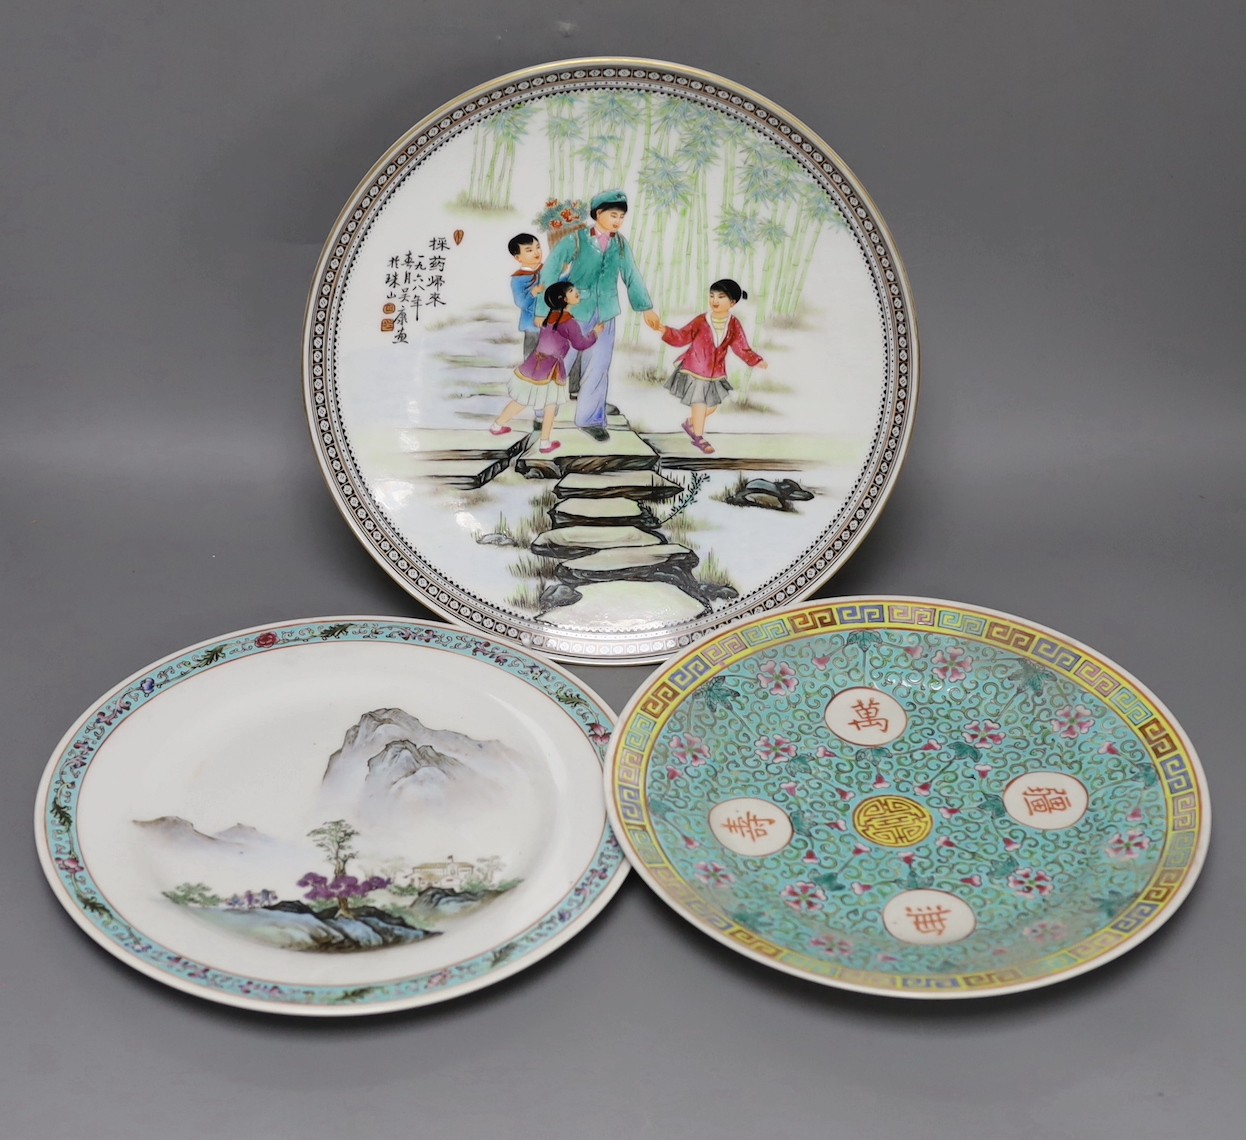 Three Chinese enamelled porcelain dishes, Republic period or later, largest 27.5cm diameter